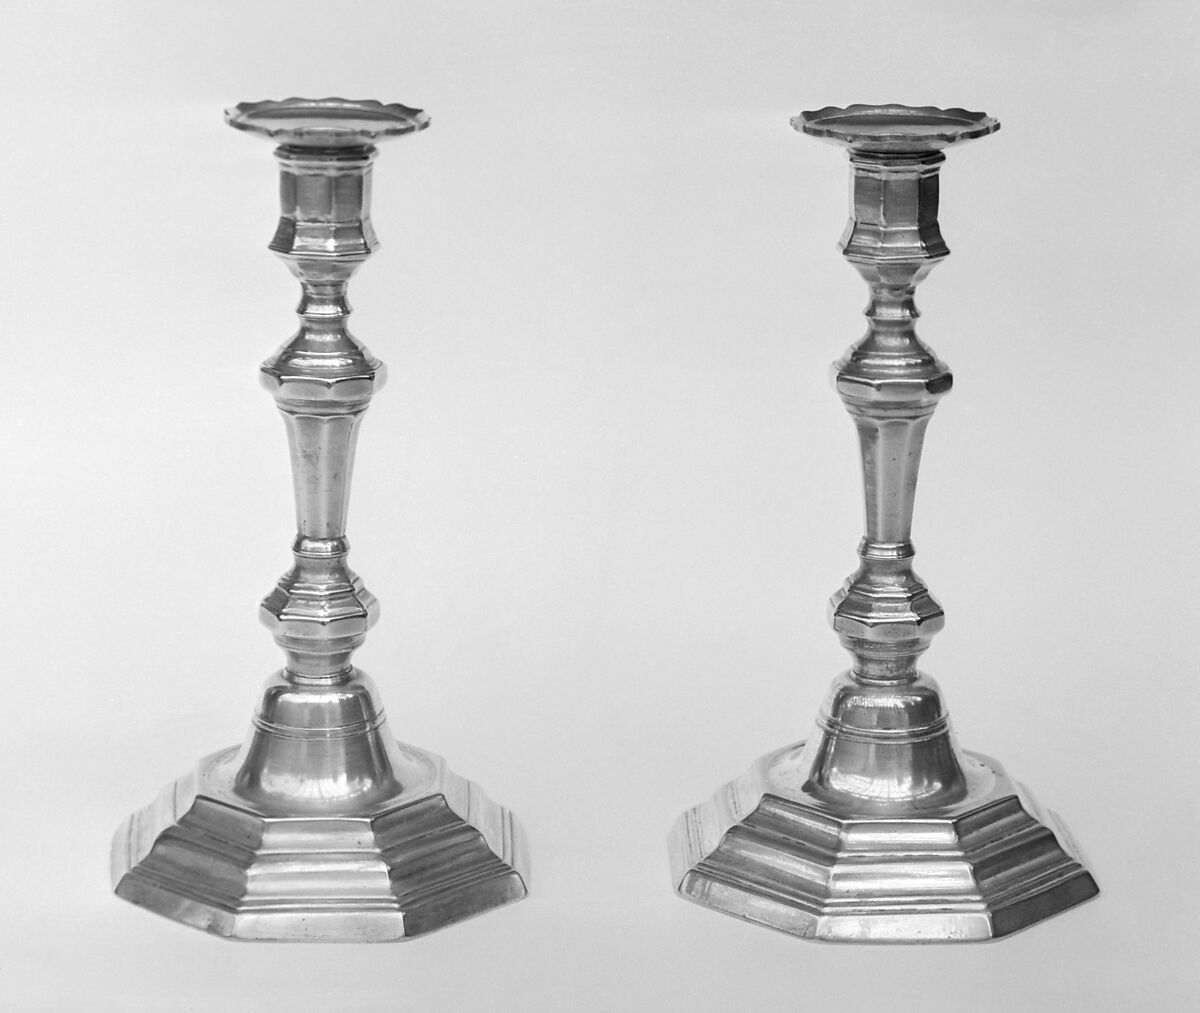 Pair of candlesticks, Brass, silver-plated, French 